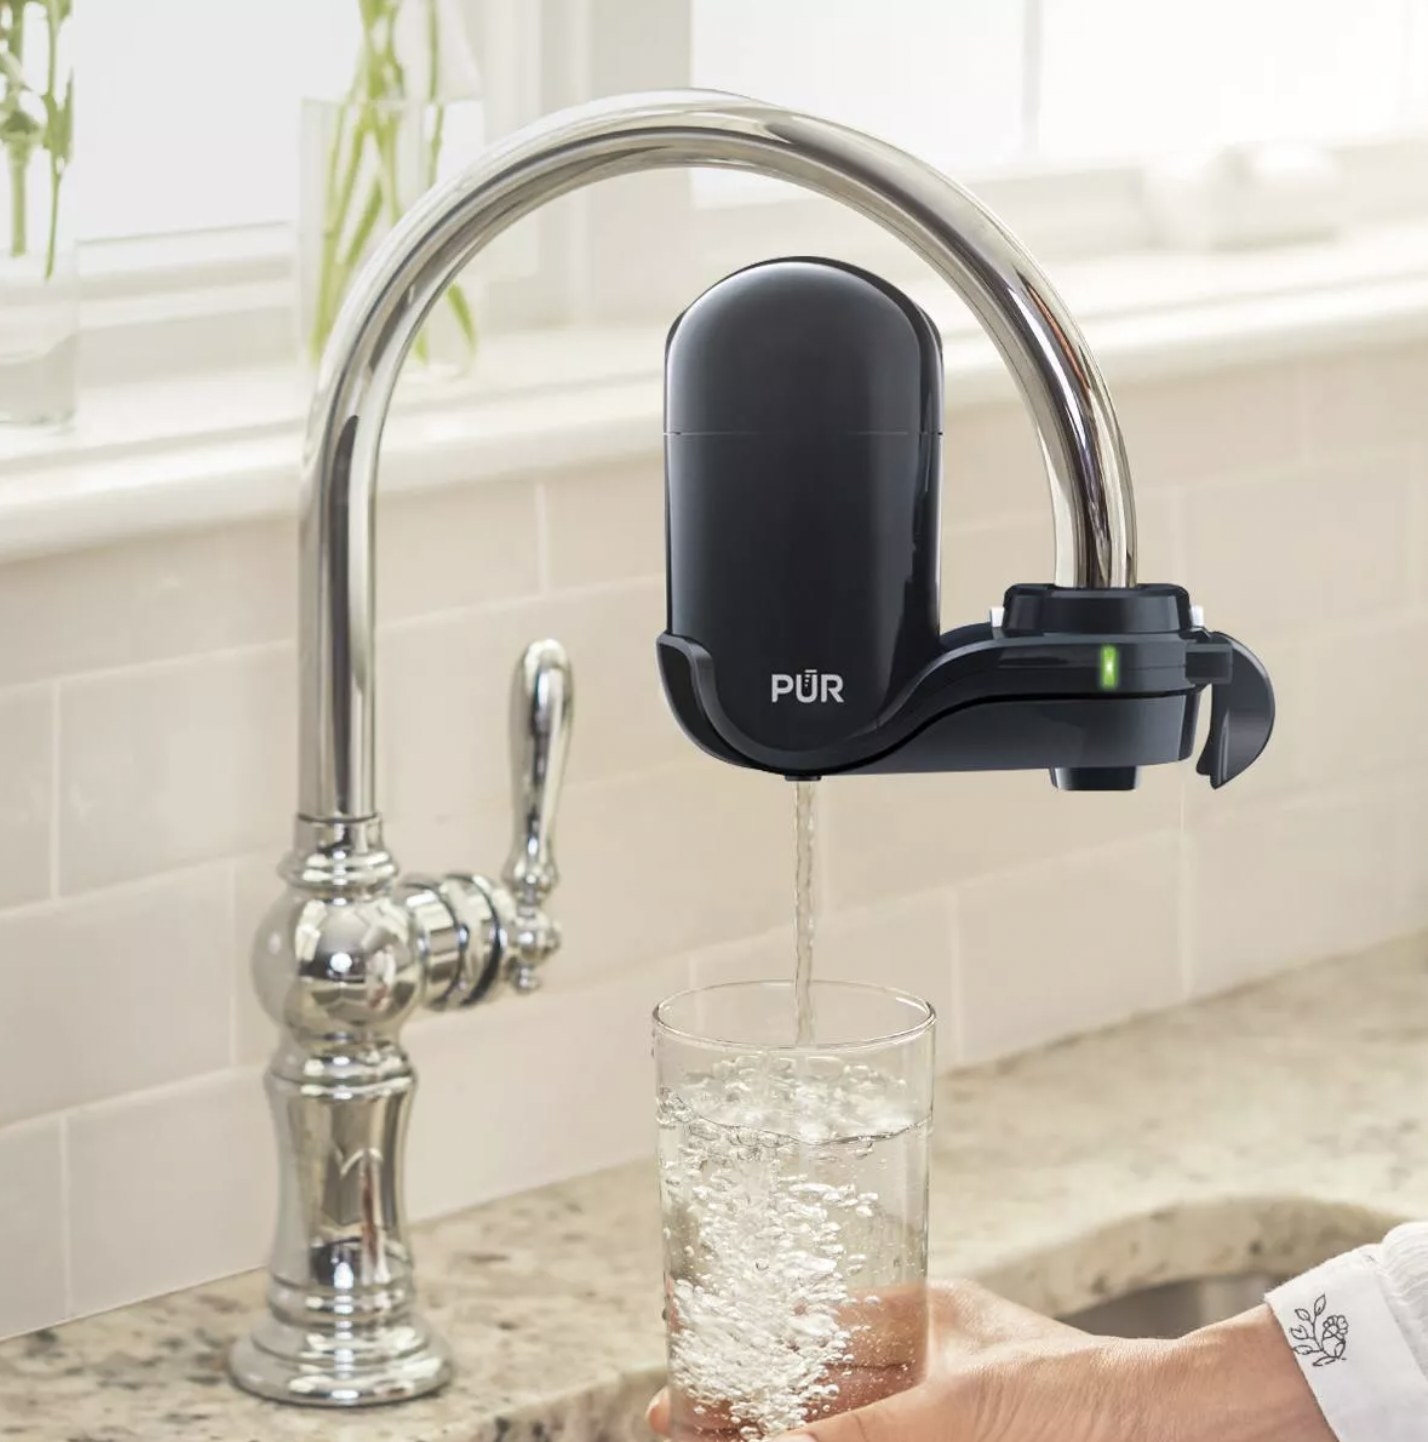 The black filter attached to faucet and dispensing clear purified water into a glass